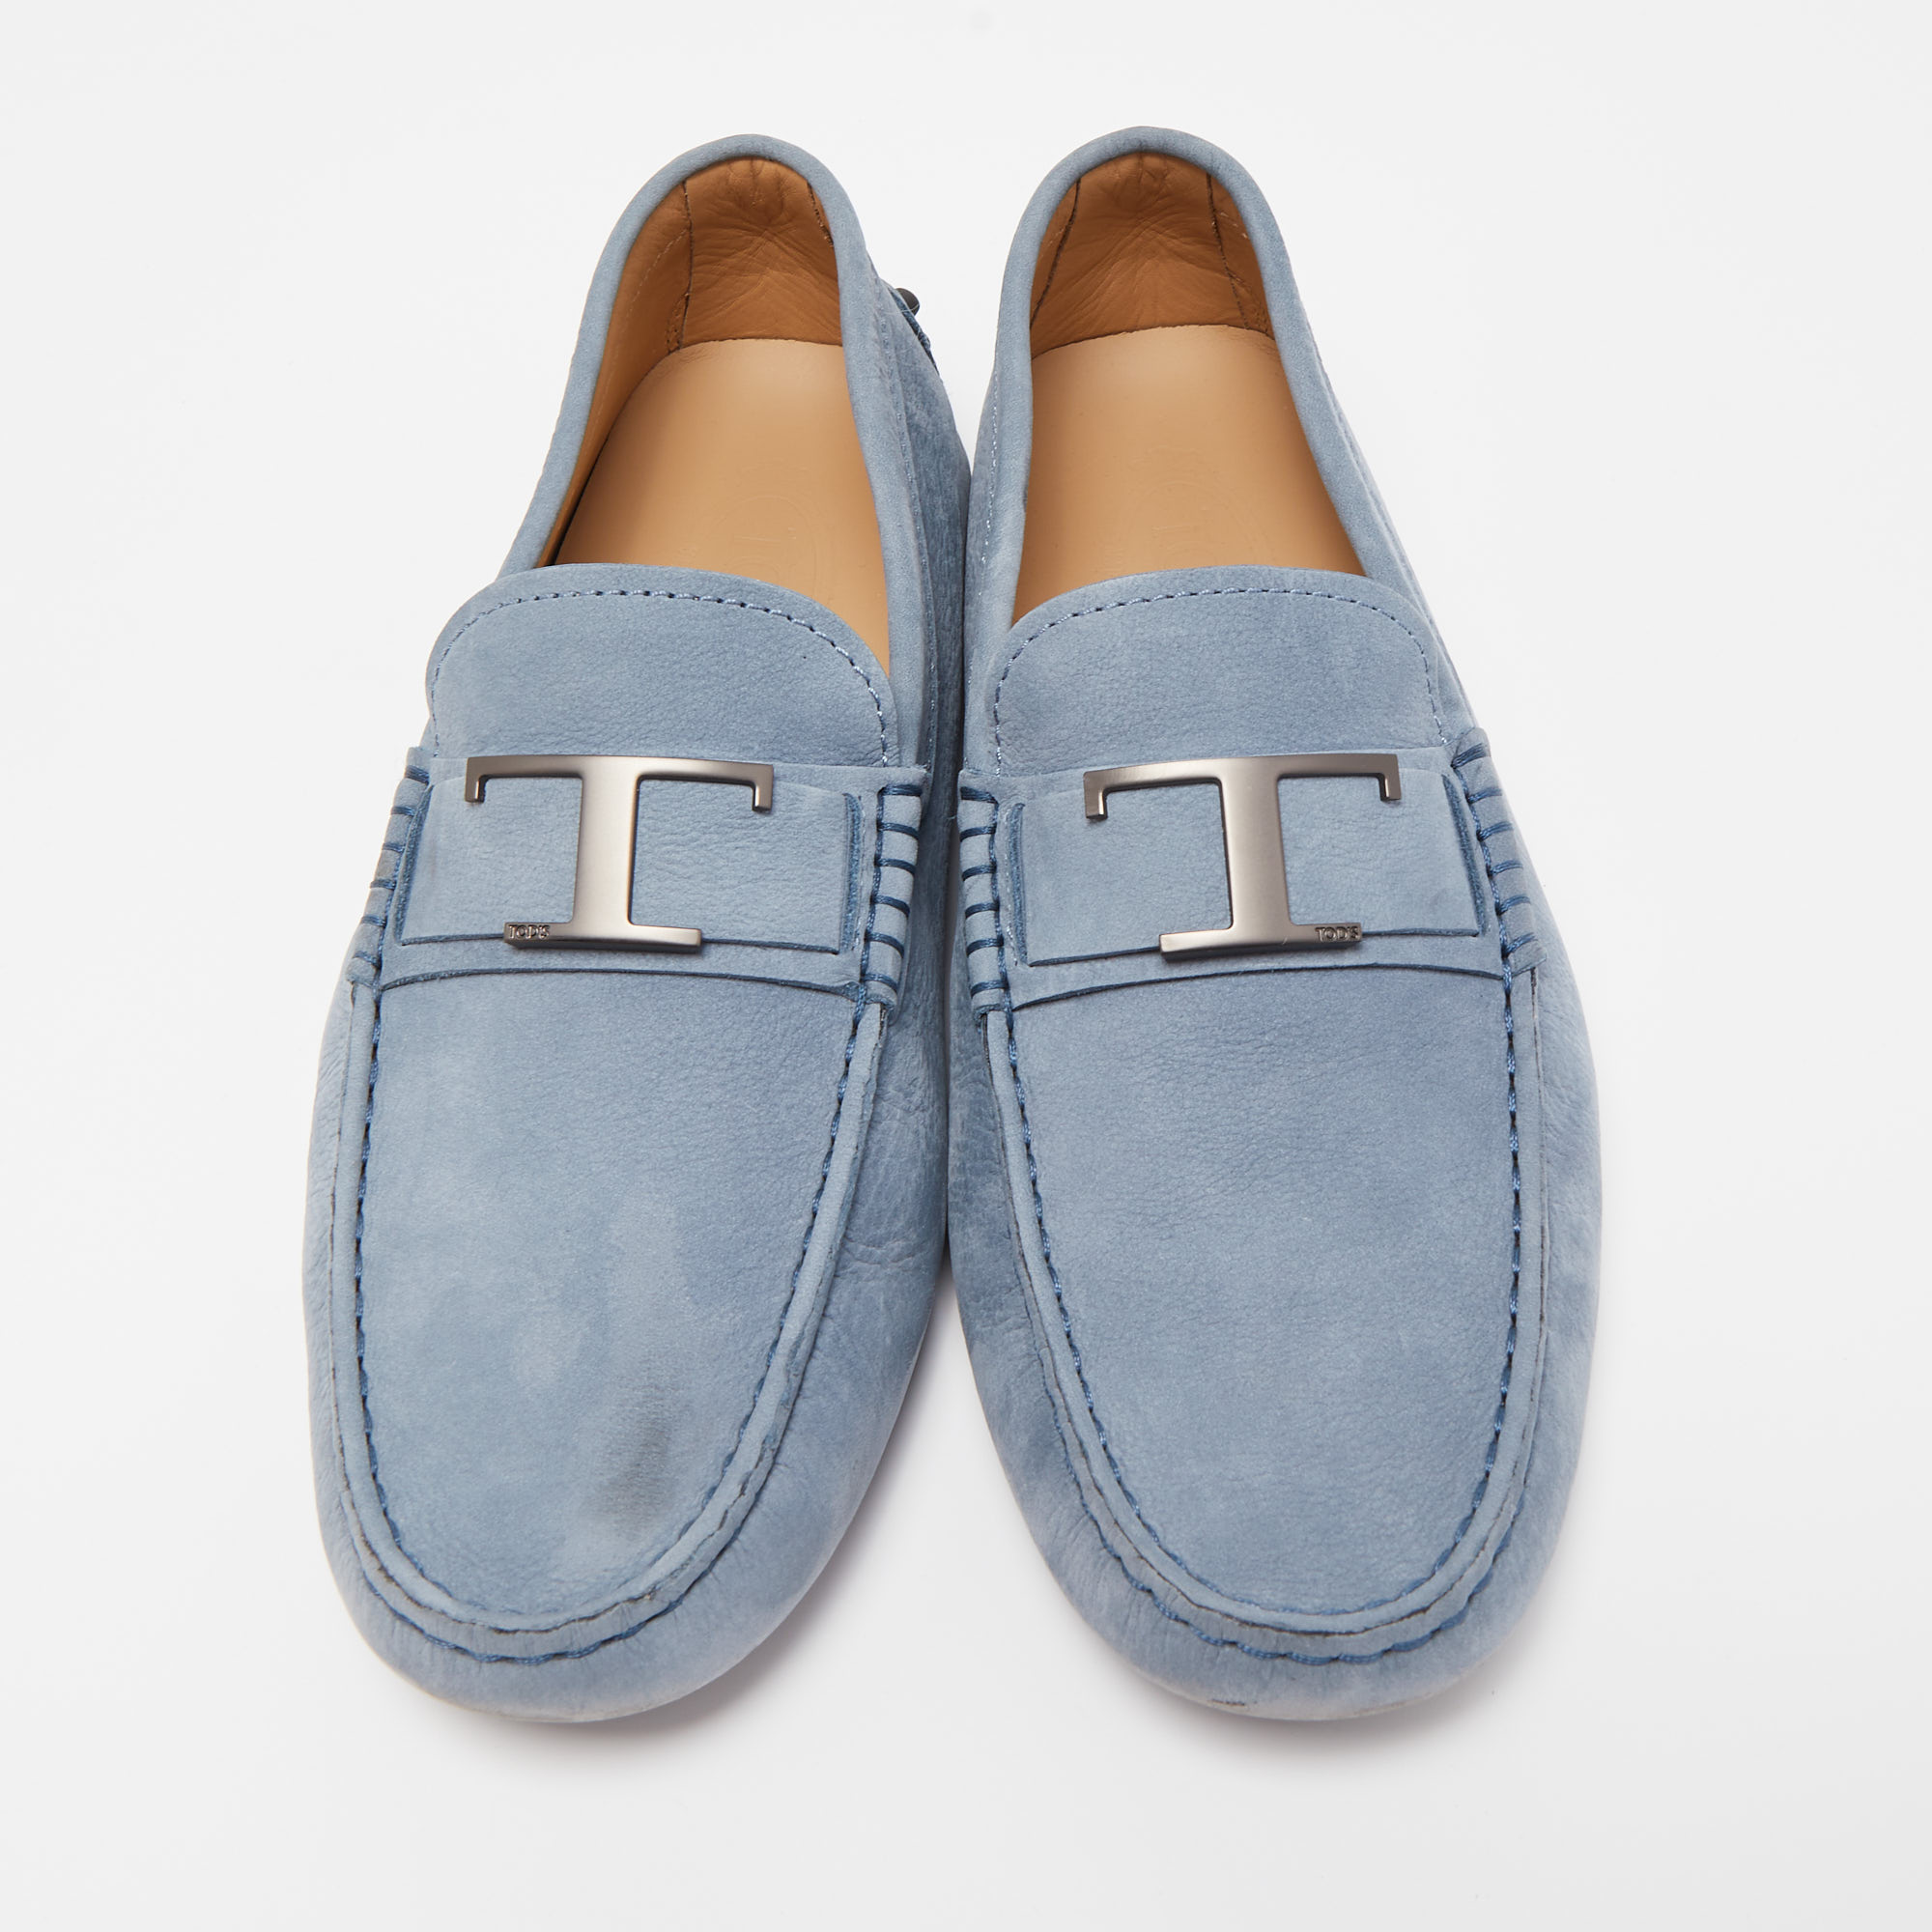 Tod's Blue Nubuck Leather Slip On Loafers Size  41